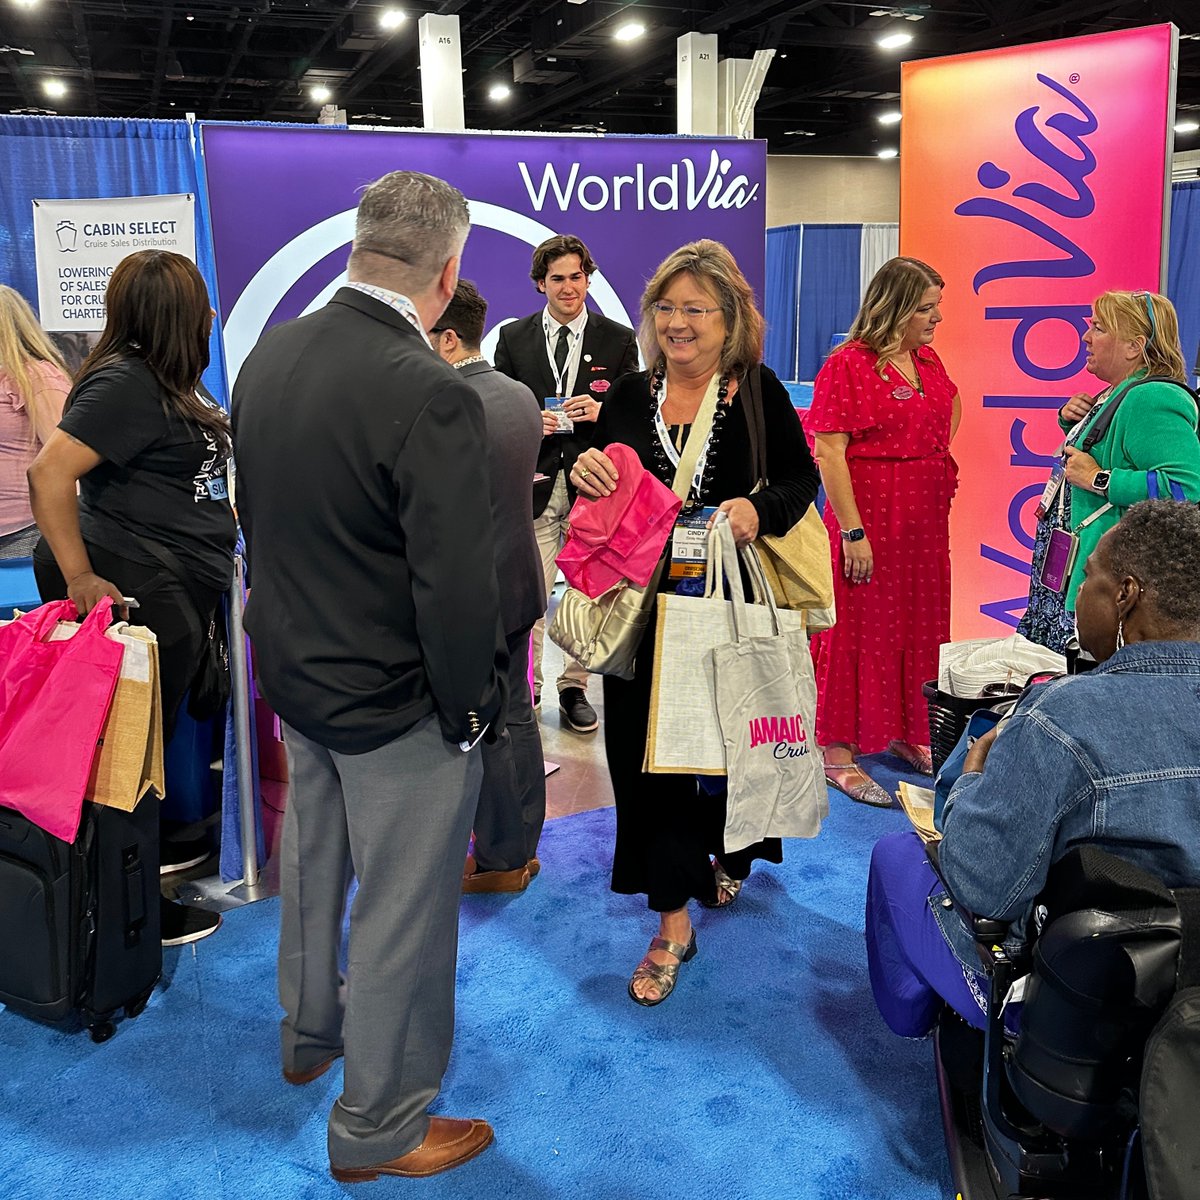 Thanks to everyone who stopped by our booth at Cruise360 today. #weAREcruise #LoveTraveLiveTravel